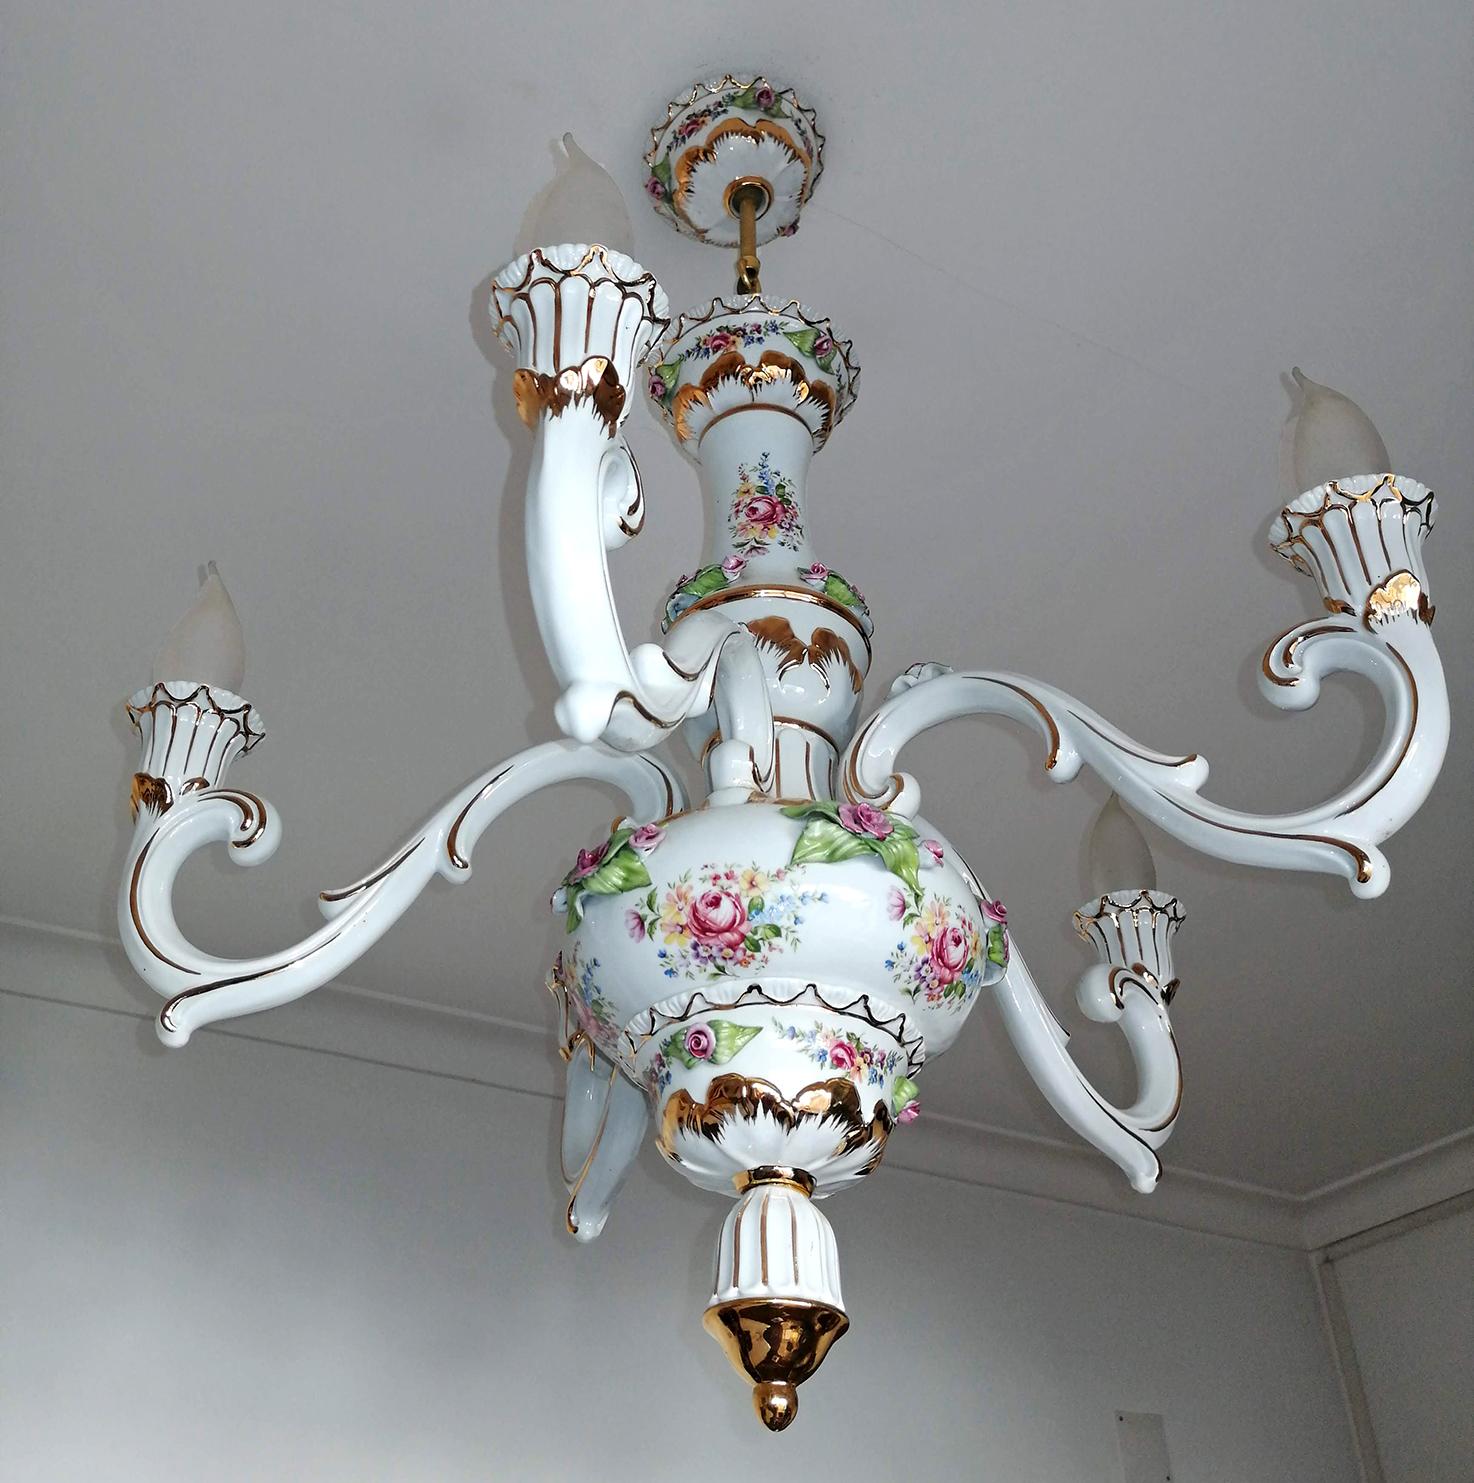 Gorgeous French Limoges style hand painted porcelain chandelier with five-light bulbs and sculpted applique porcelain roses, leaves and gilt brass
Measures:
Diameter 23.6 in/ 60 cm
Height 29.5 in/ 75 cm, chain (20 cm)
Weight: 10 lb/ 5 Kg
Five light